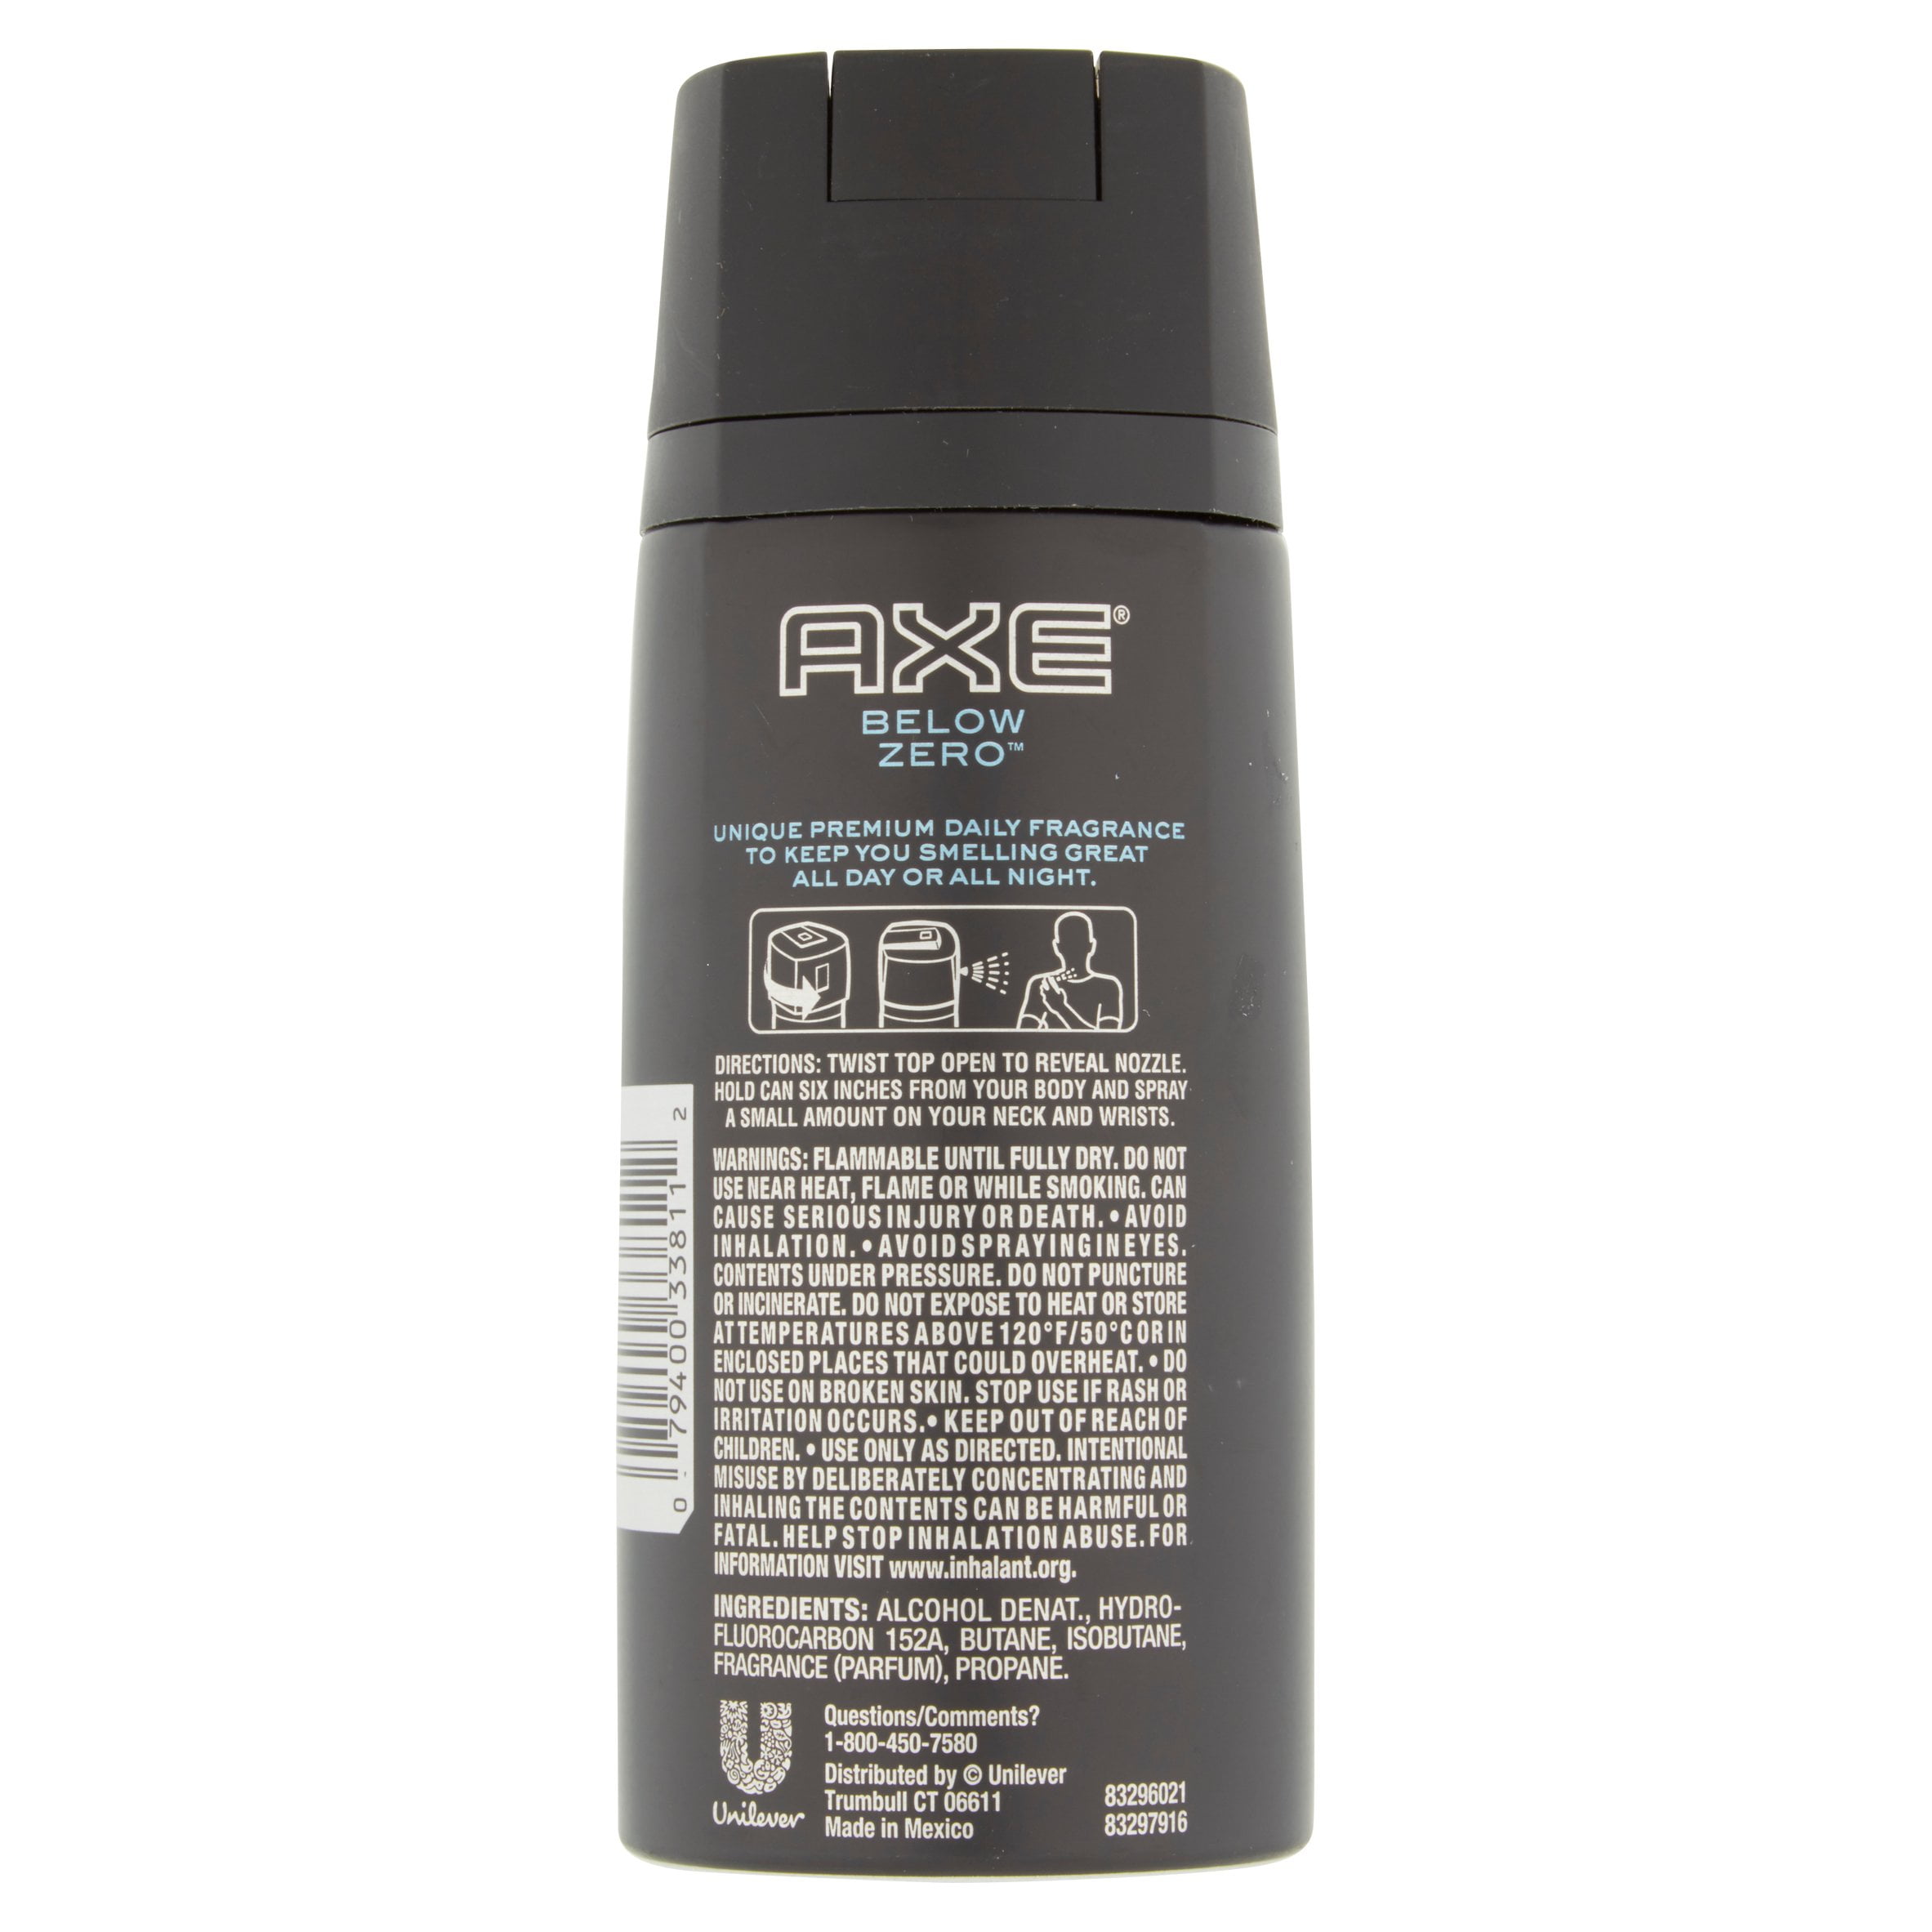 What are the ingredients in AXE Body Spray?